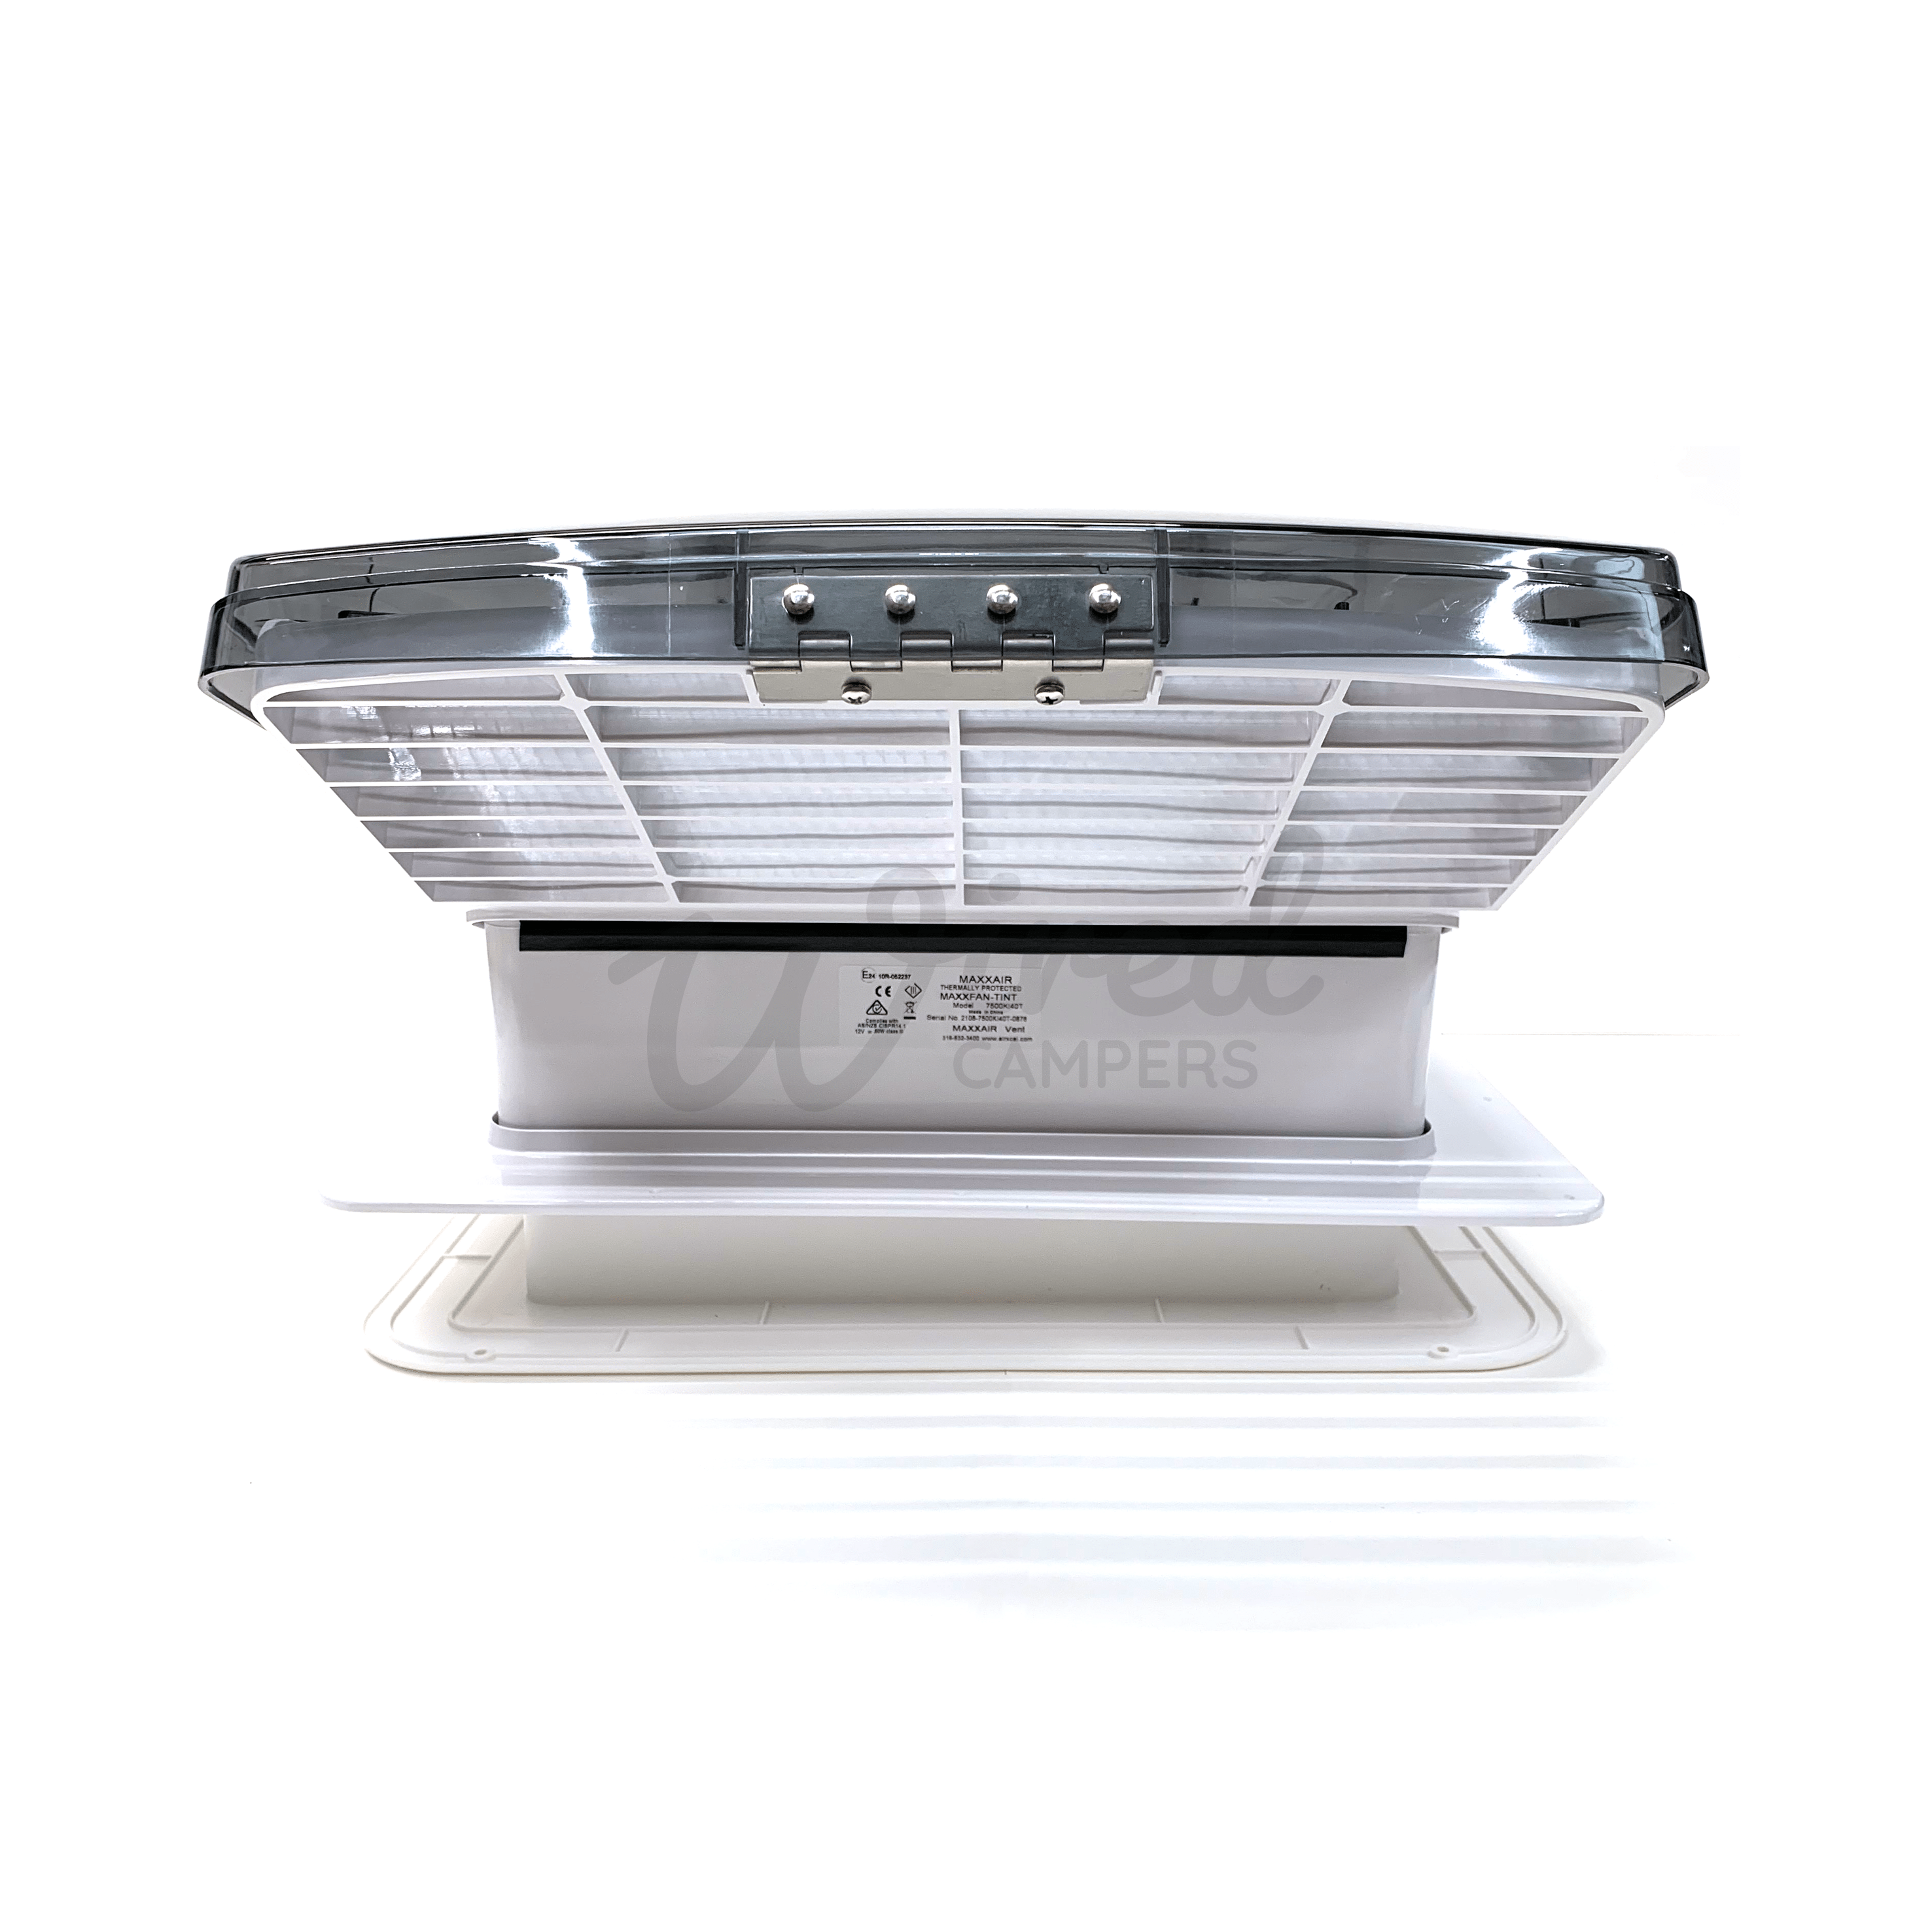 Wired Campers Limited Maxxair MAXXFAN Deluxe Remote Controlled Automatic Roof Fan Vent - Tinted Lid